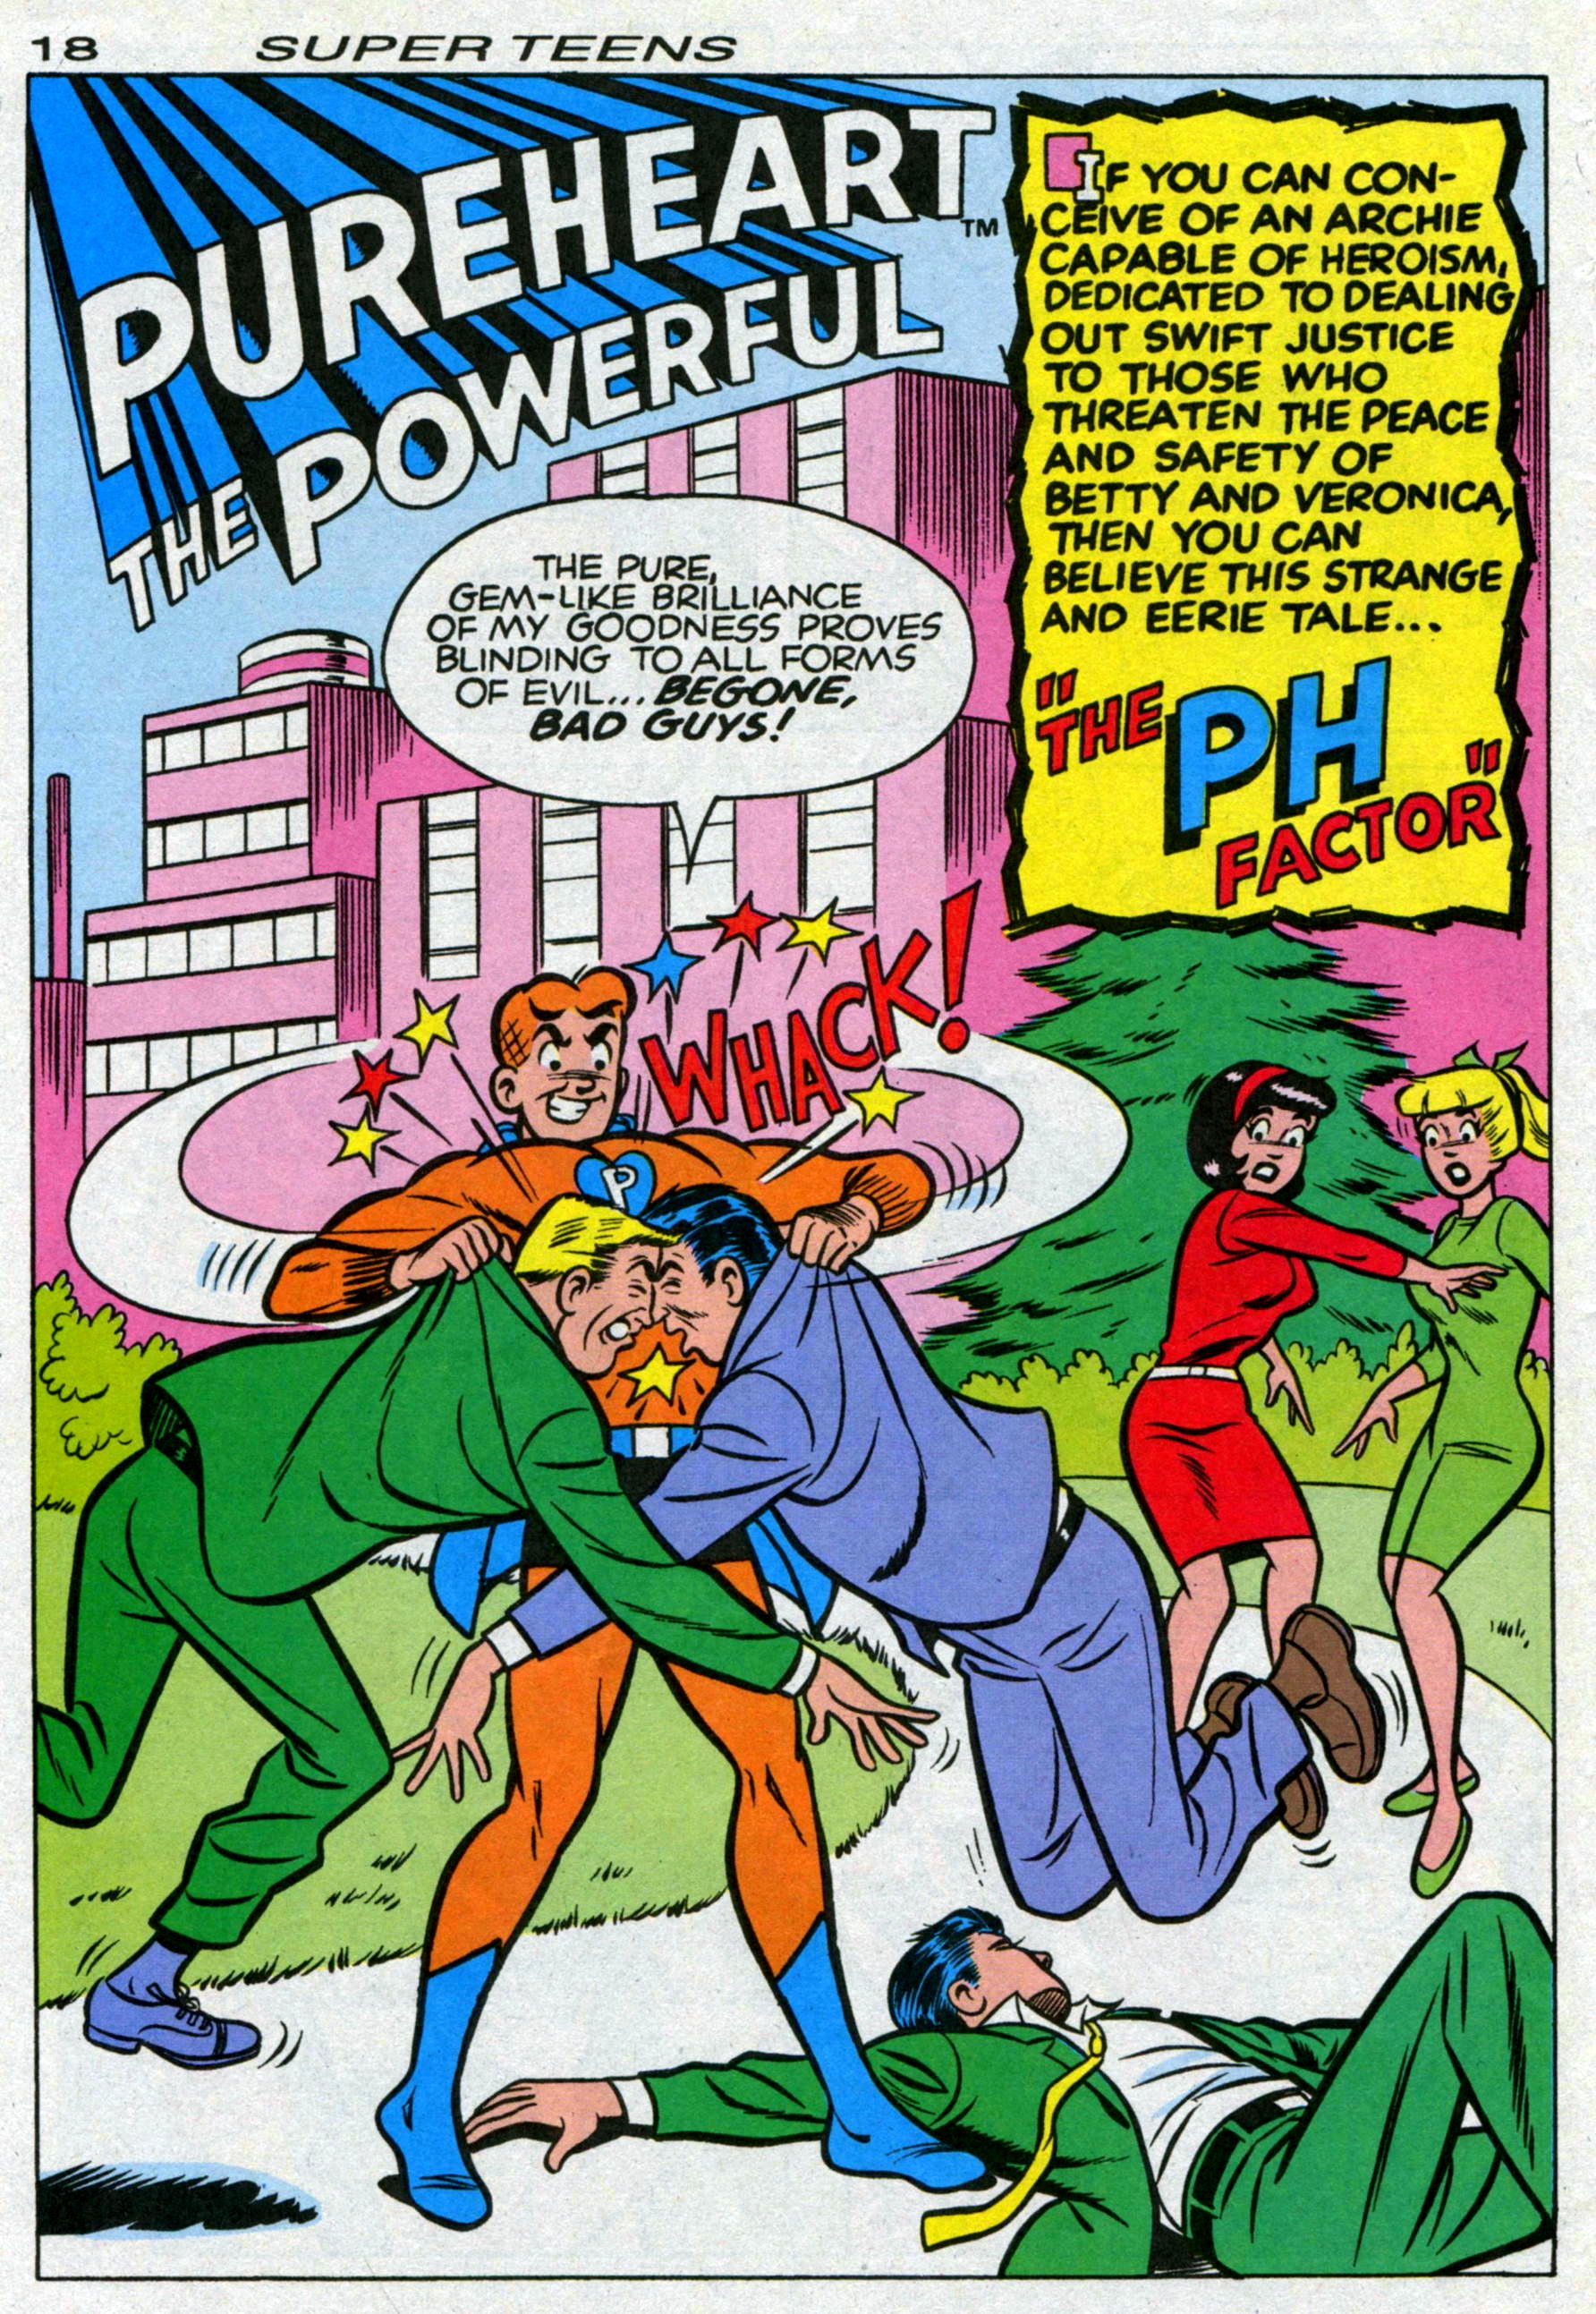 Read online Archie's Super Teens comic -  Issue #1 - 20